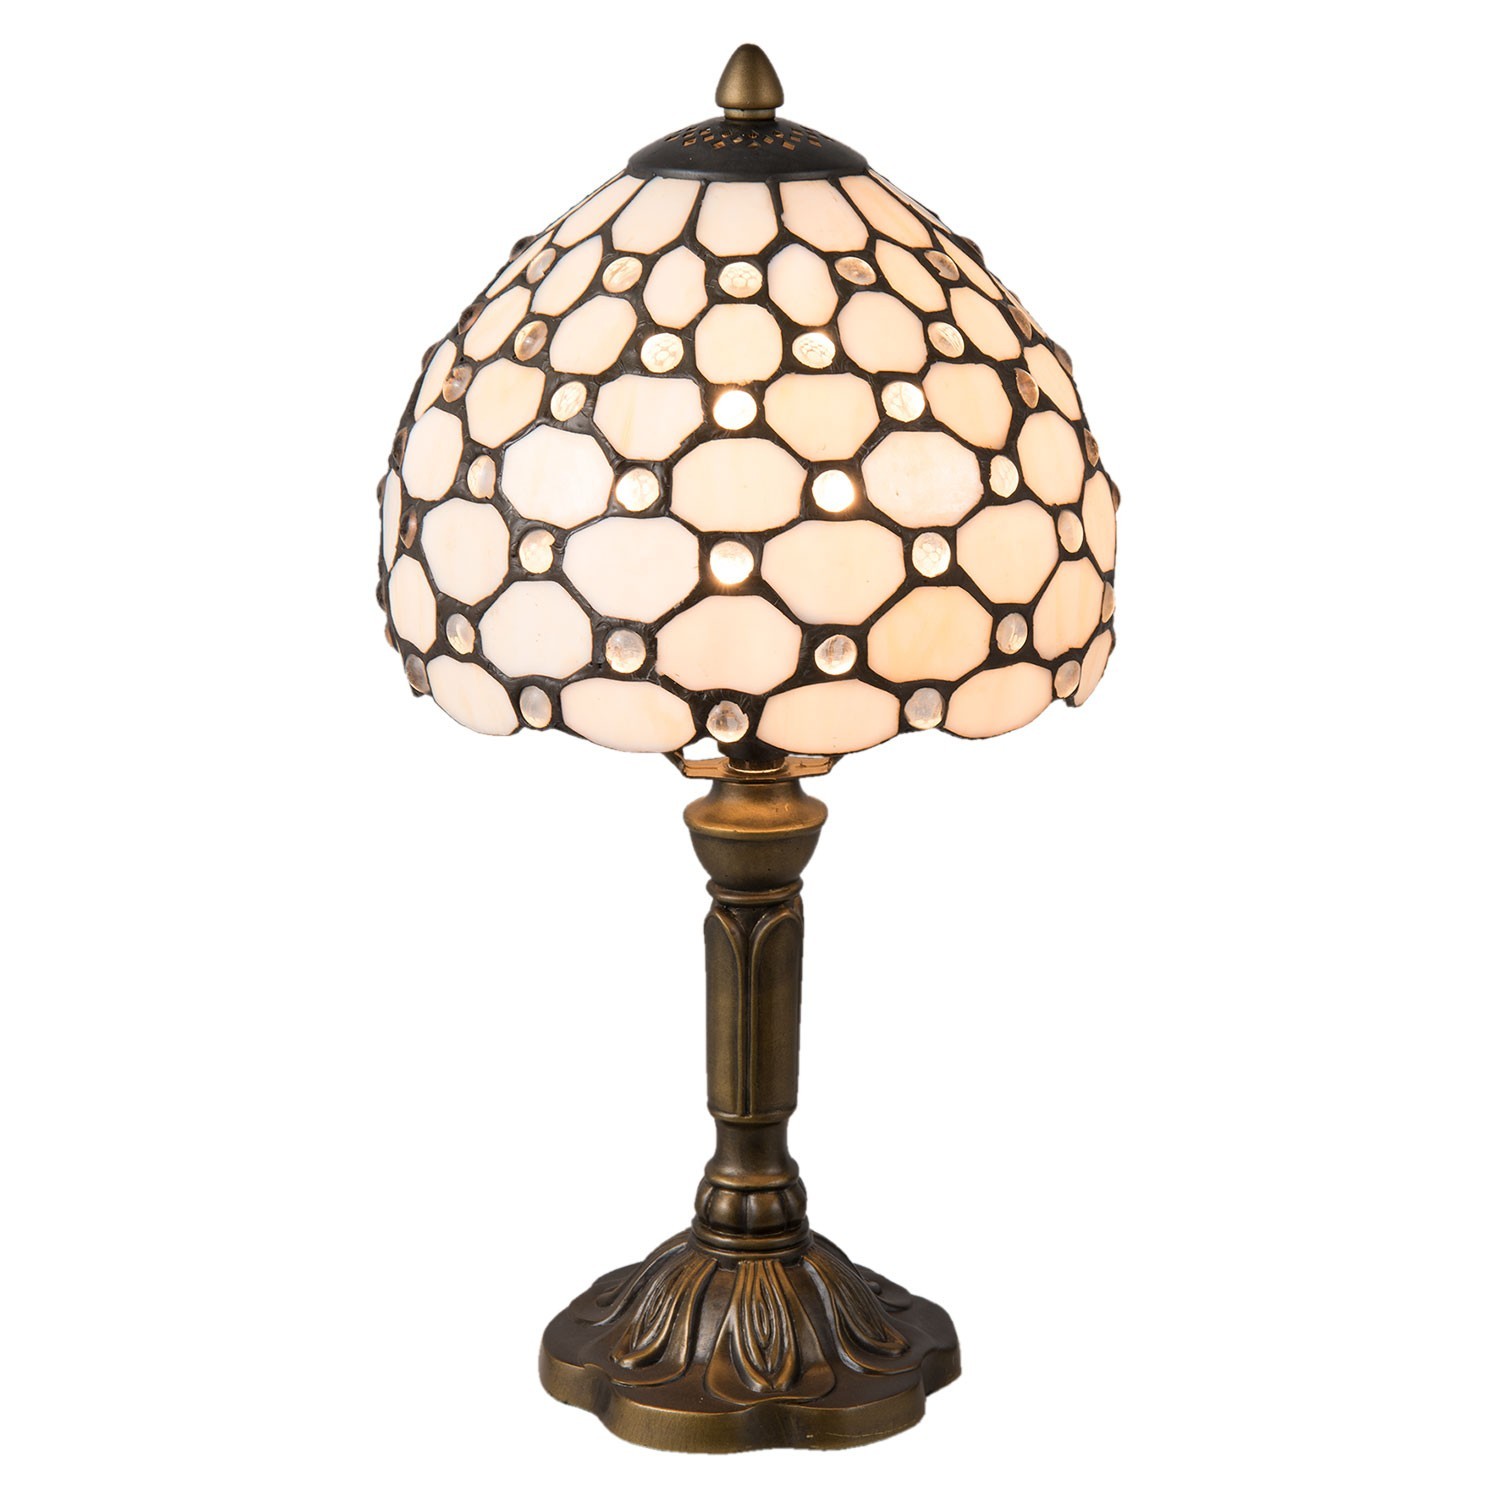 Stolní lampa Tiffany  Excelent - Ø 20*38 cm  Clayre & Eef